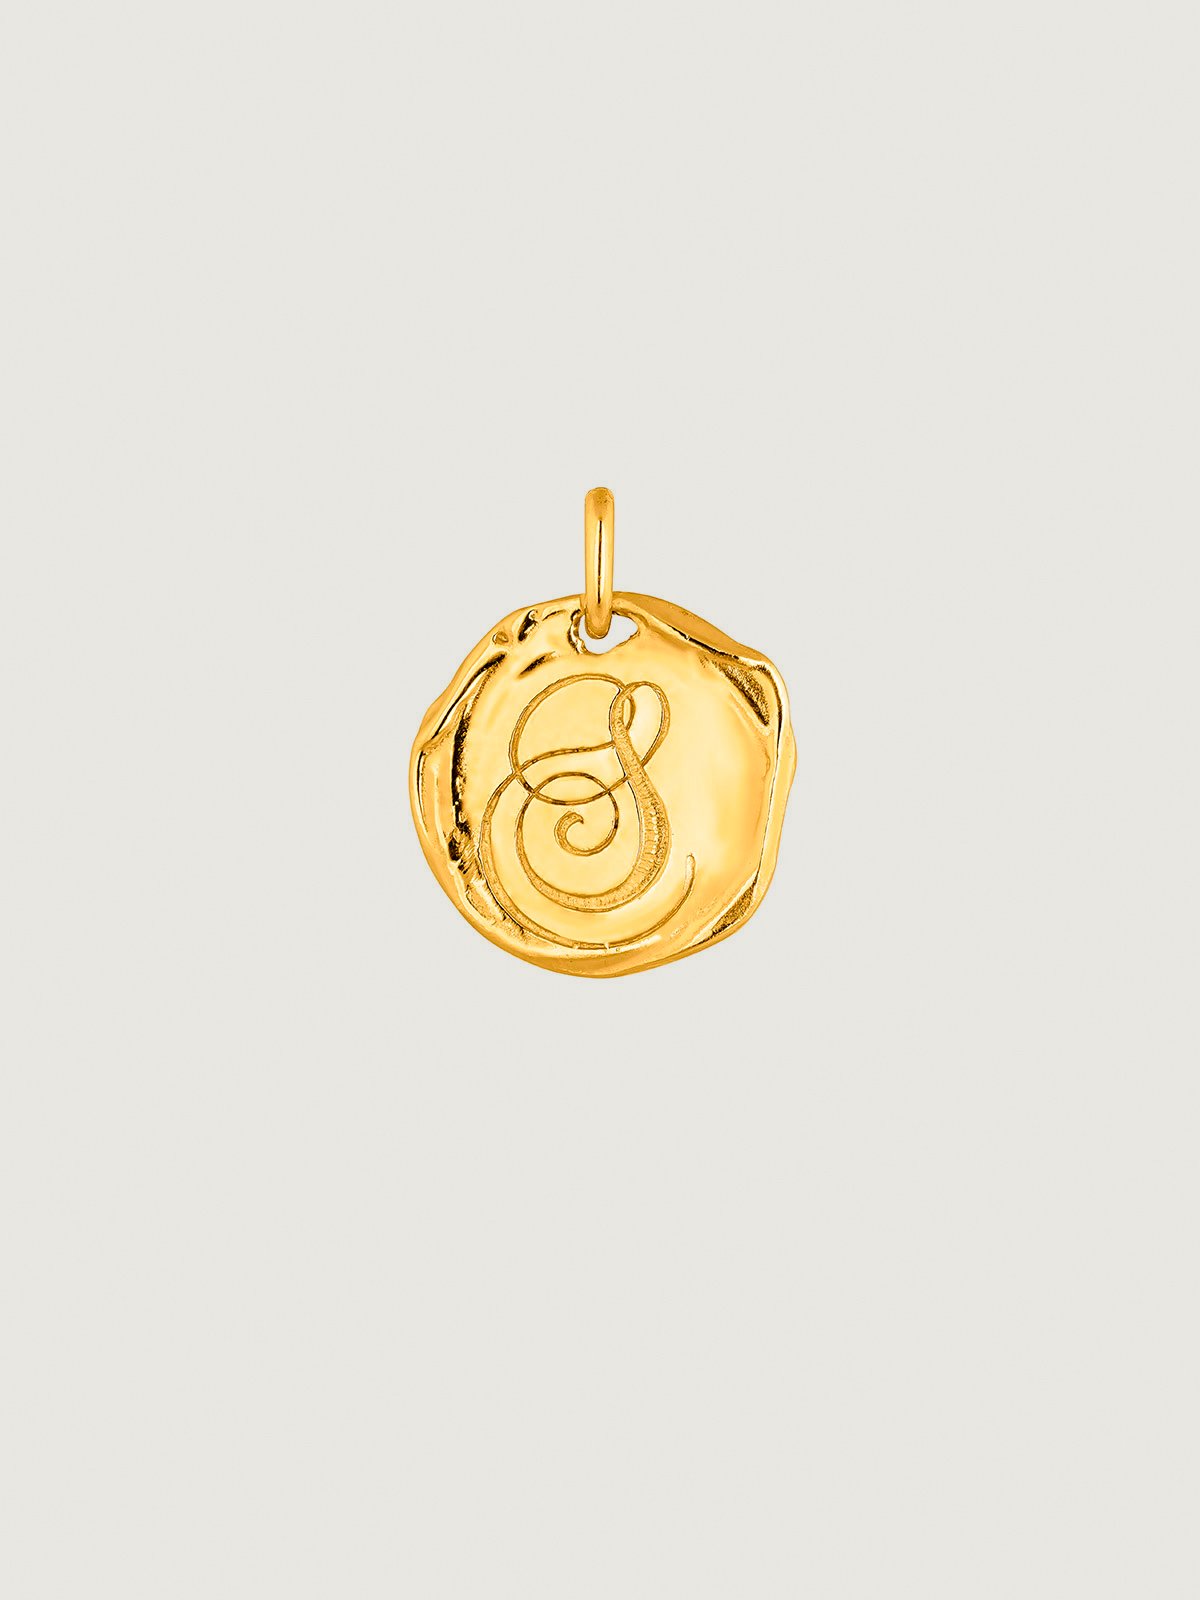 Handcrafted 925 silver charm bathed in 18K yellow gold with initial S